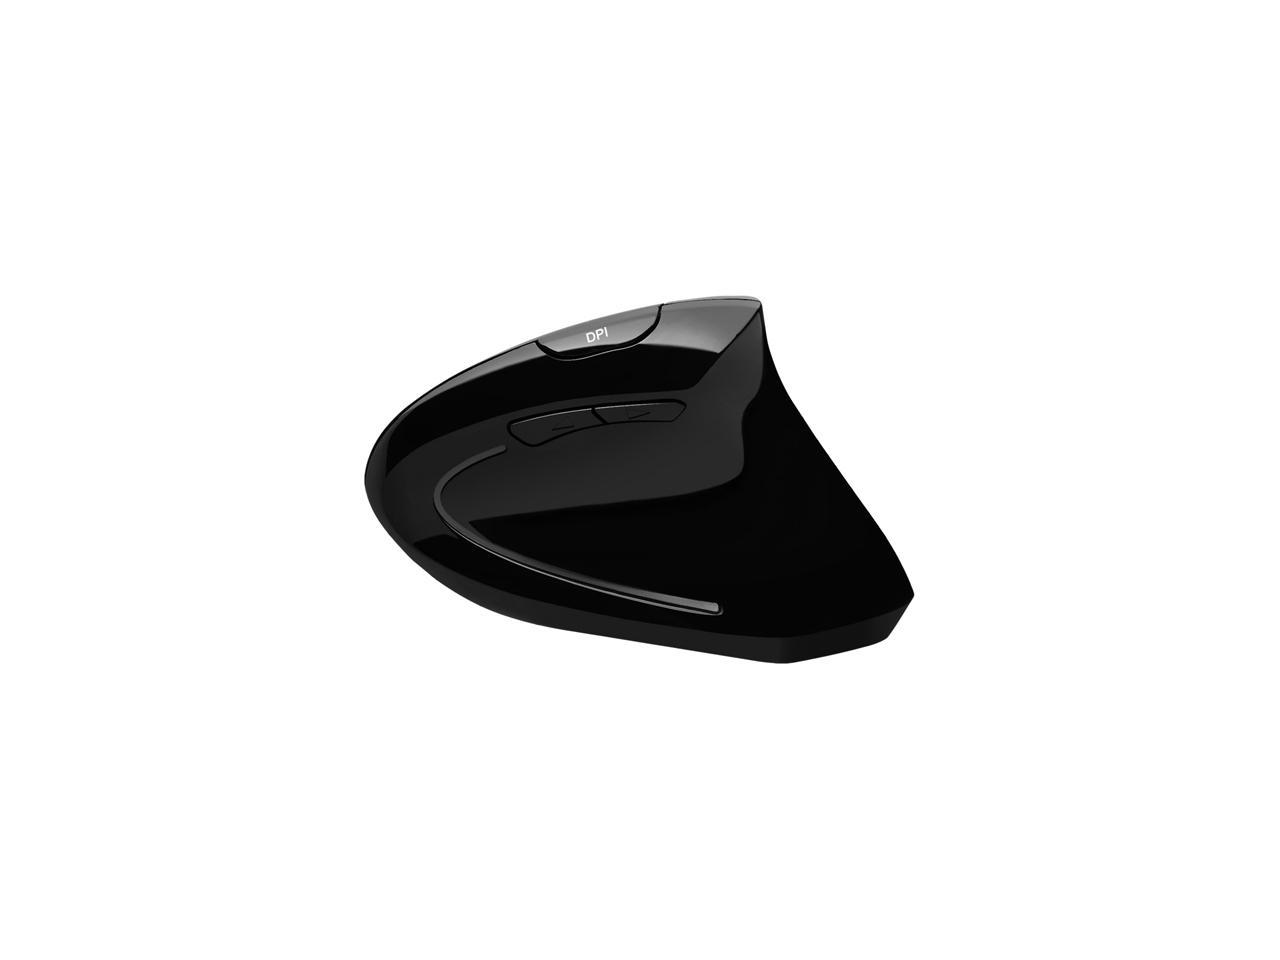 Adesso iMouseE10 2.4 GHz RF wireless Vertical Ergonomic mouse with DPI switch button